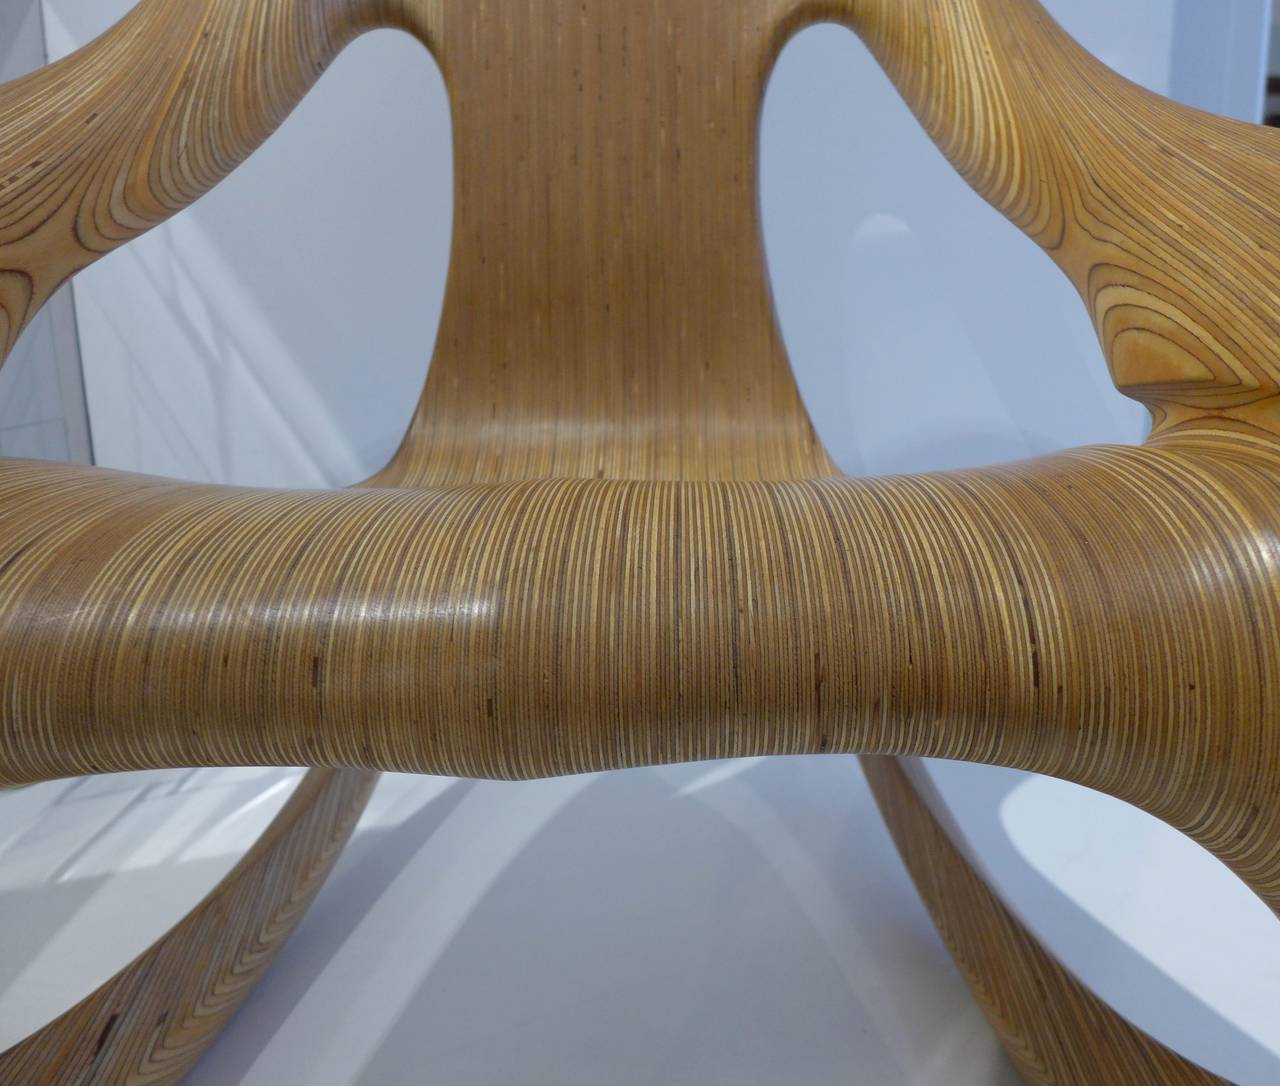 Late 20th Century Sculptural Craft Rocking Chair by Carl Gromoll